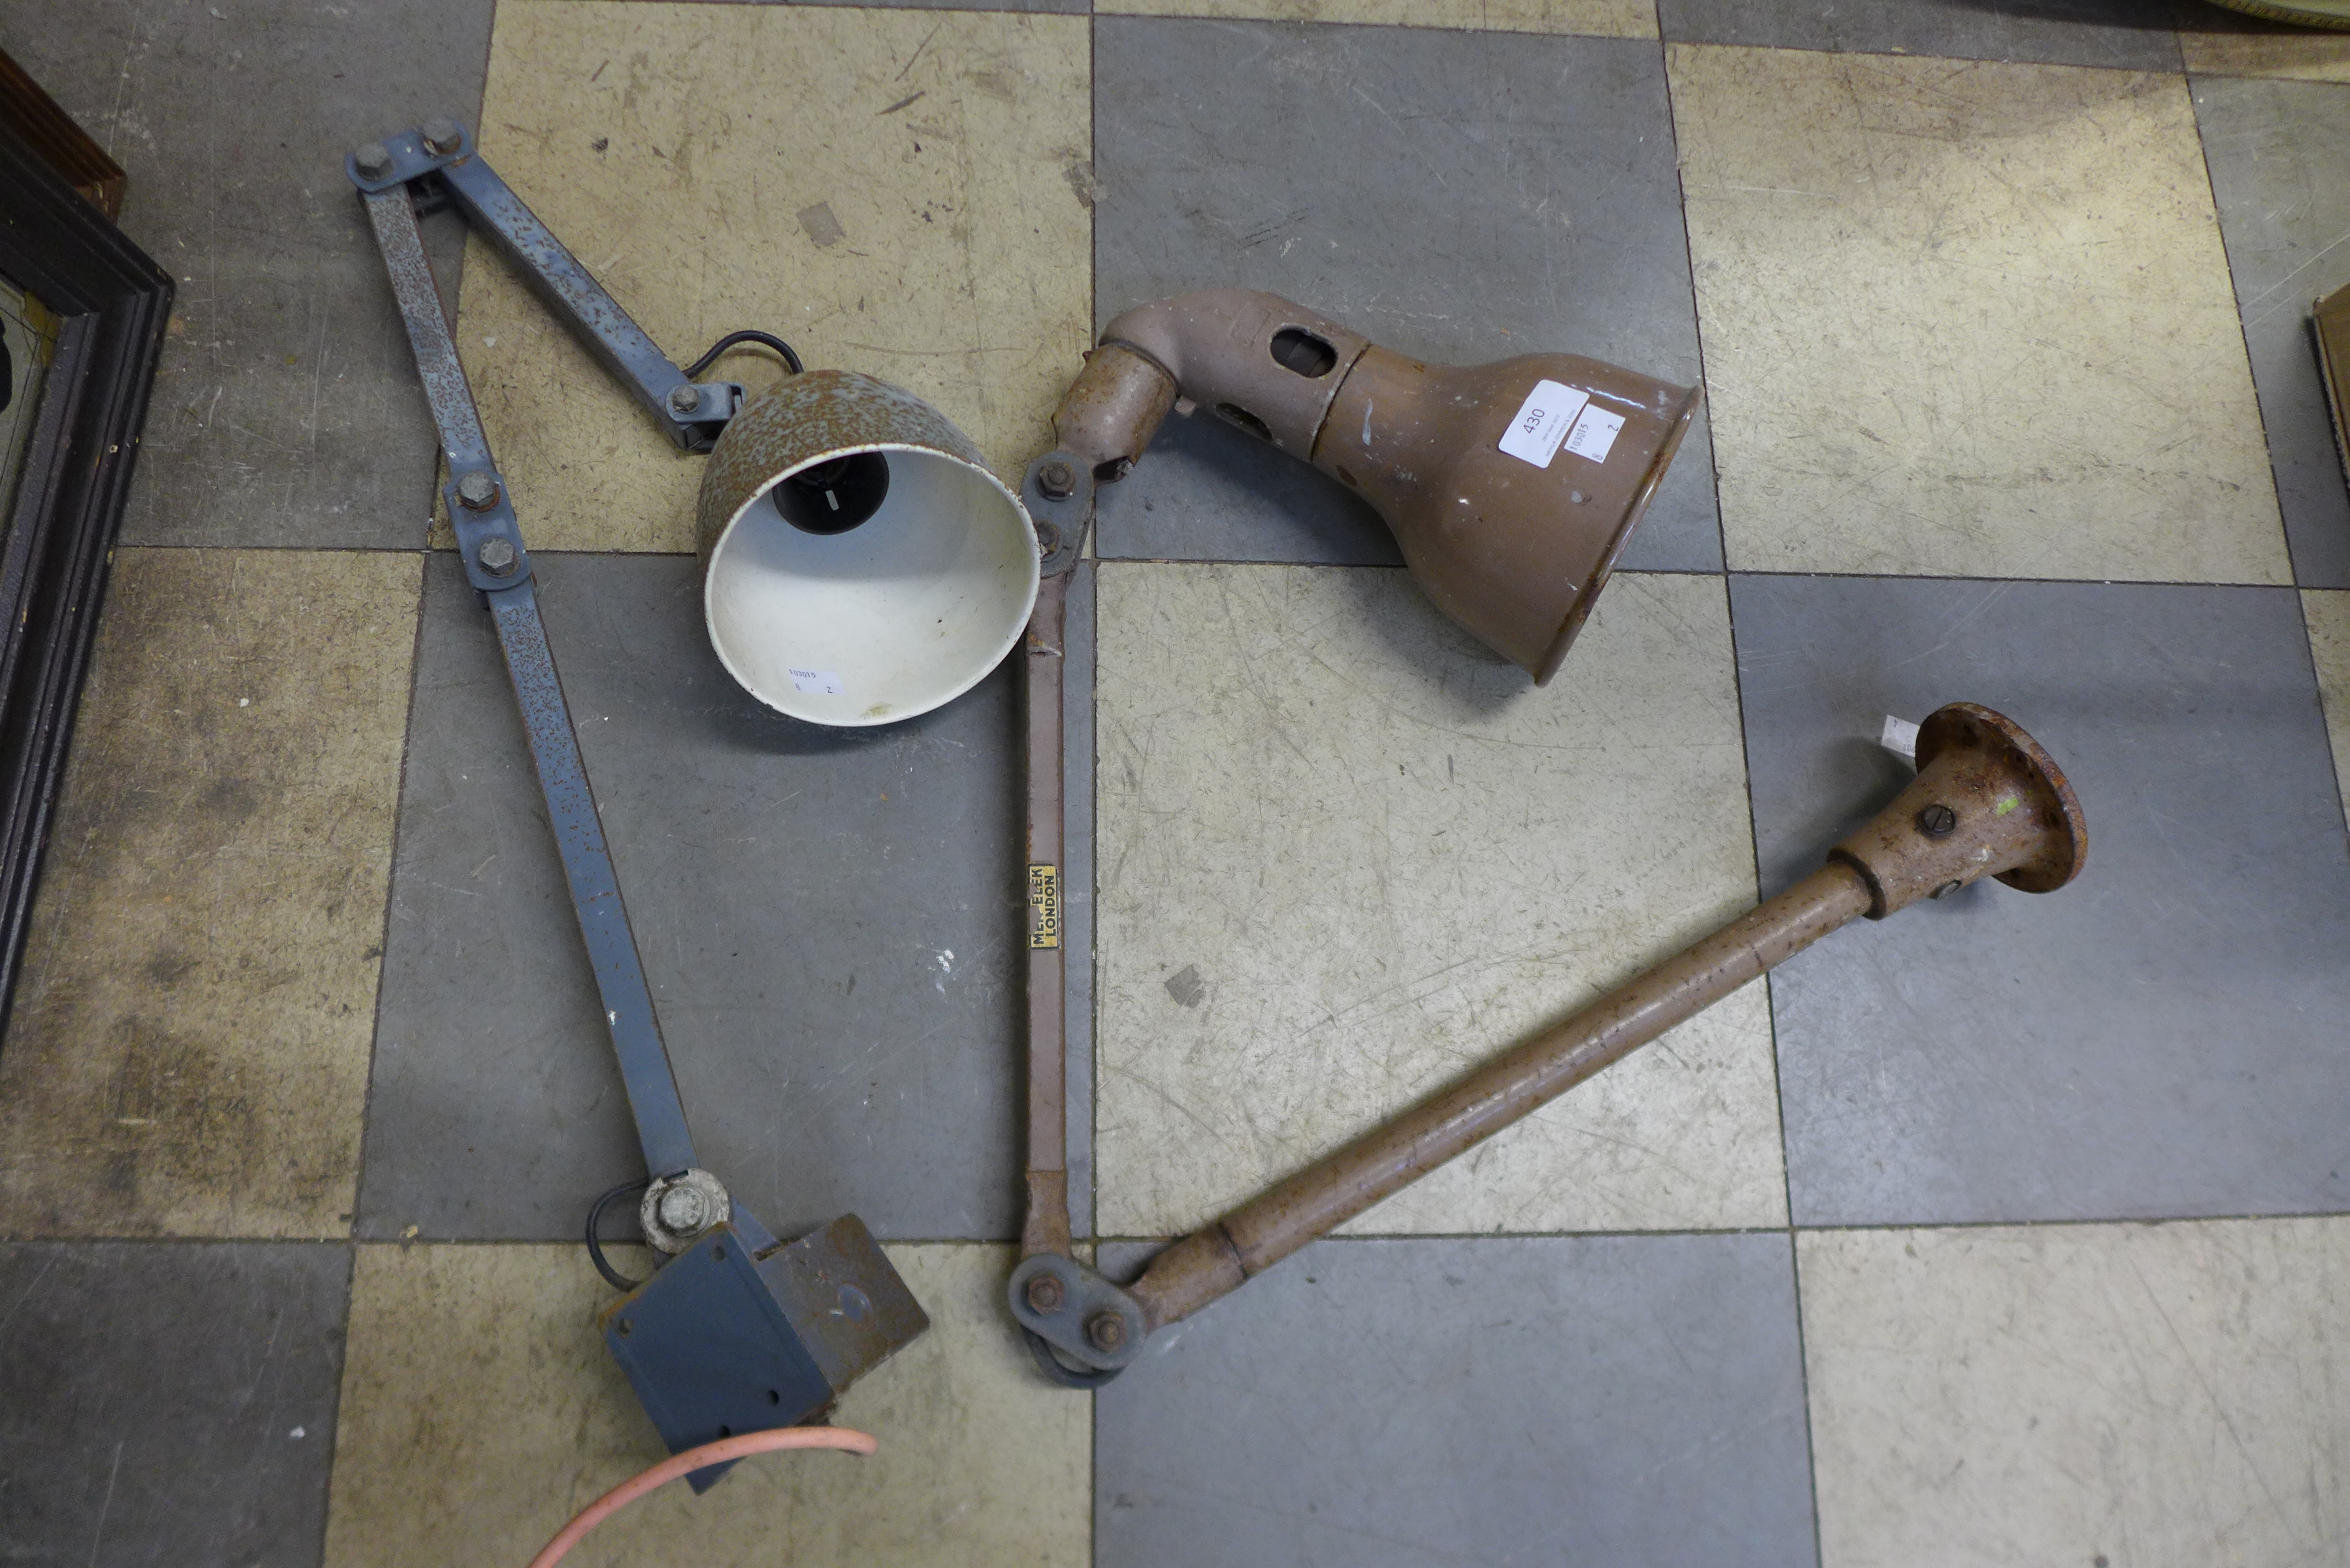 Two industrial anglepoise work lamps